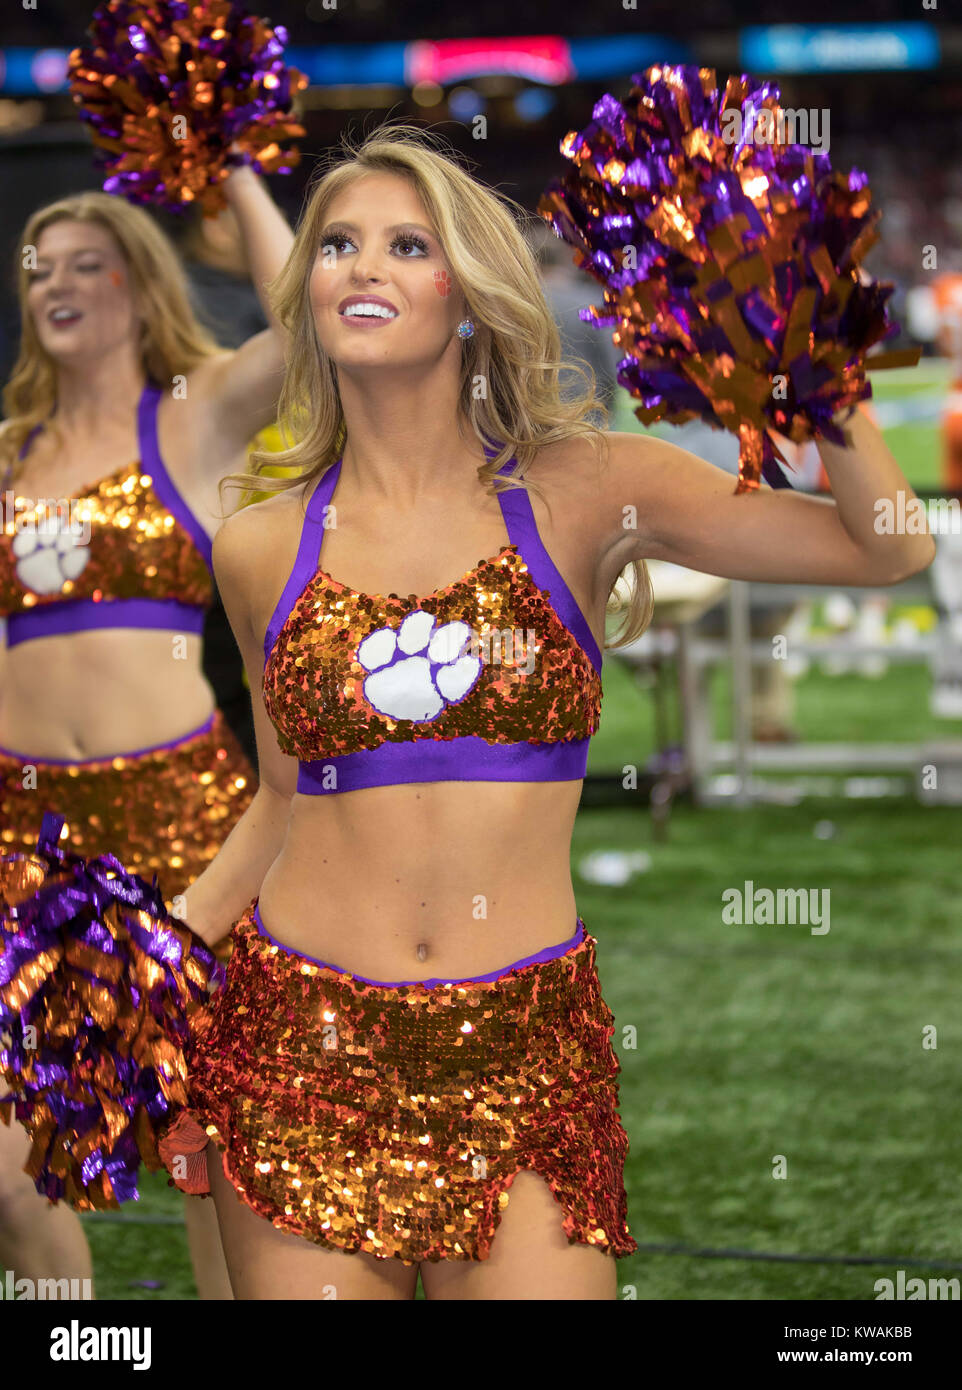 New Orleans, LA, USA. 1st Jan, 2018. Clemson Rally Cat Rachel Wyatt performs on the sidelines during the Allstate Sugar Bowl football game between the Clemson Tigers and the Alabama Crimson Tide at the Mercedes-Benz Supedome in New Orleans, LA. Kyle Okita/CSM/Alamy Live News Stock Photo